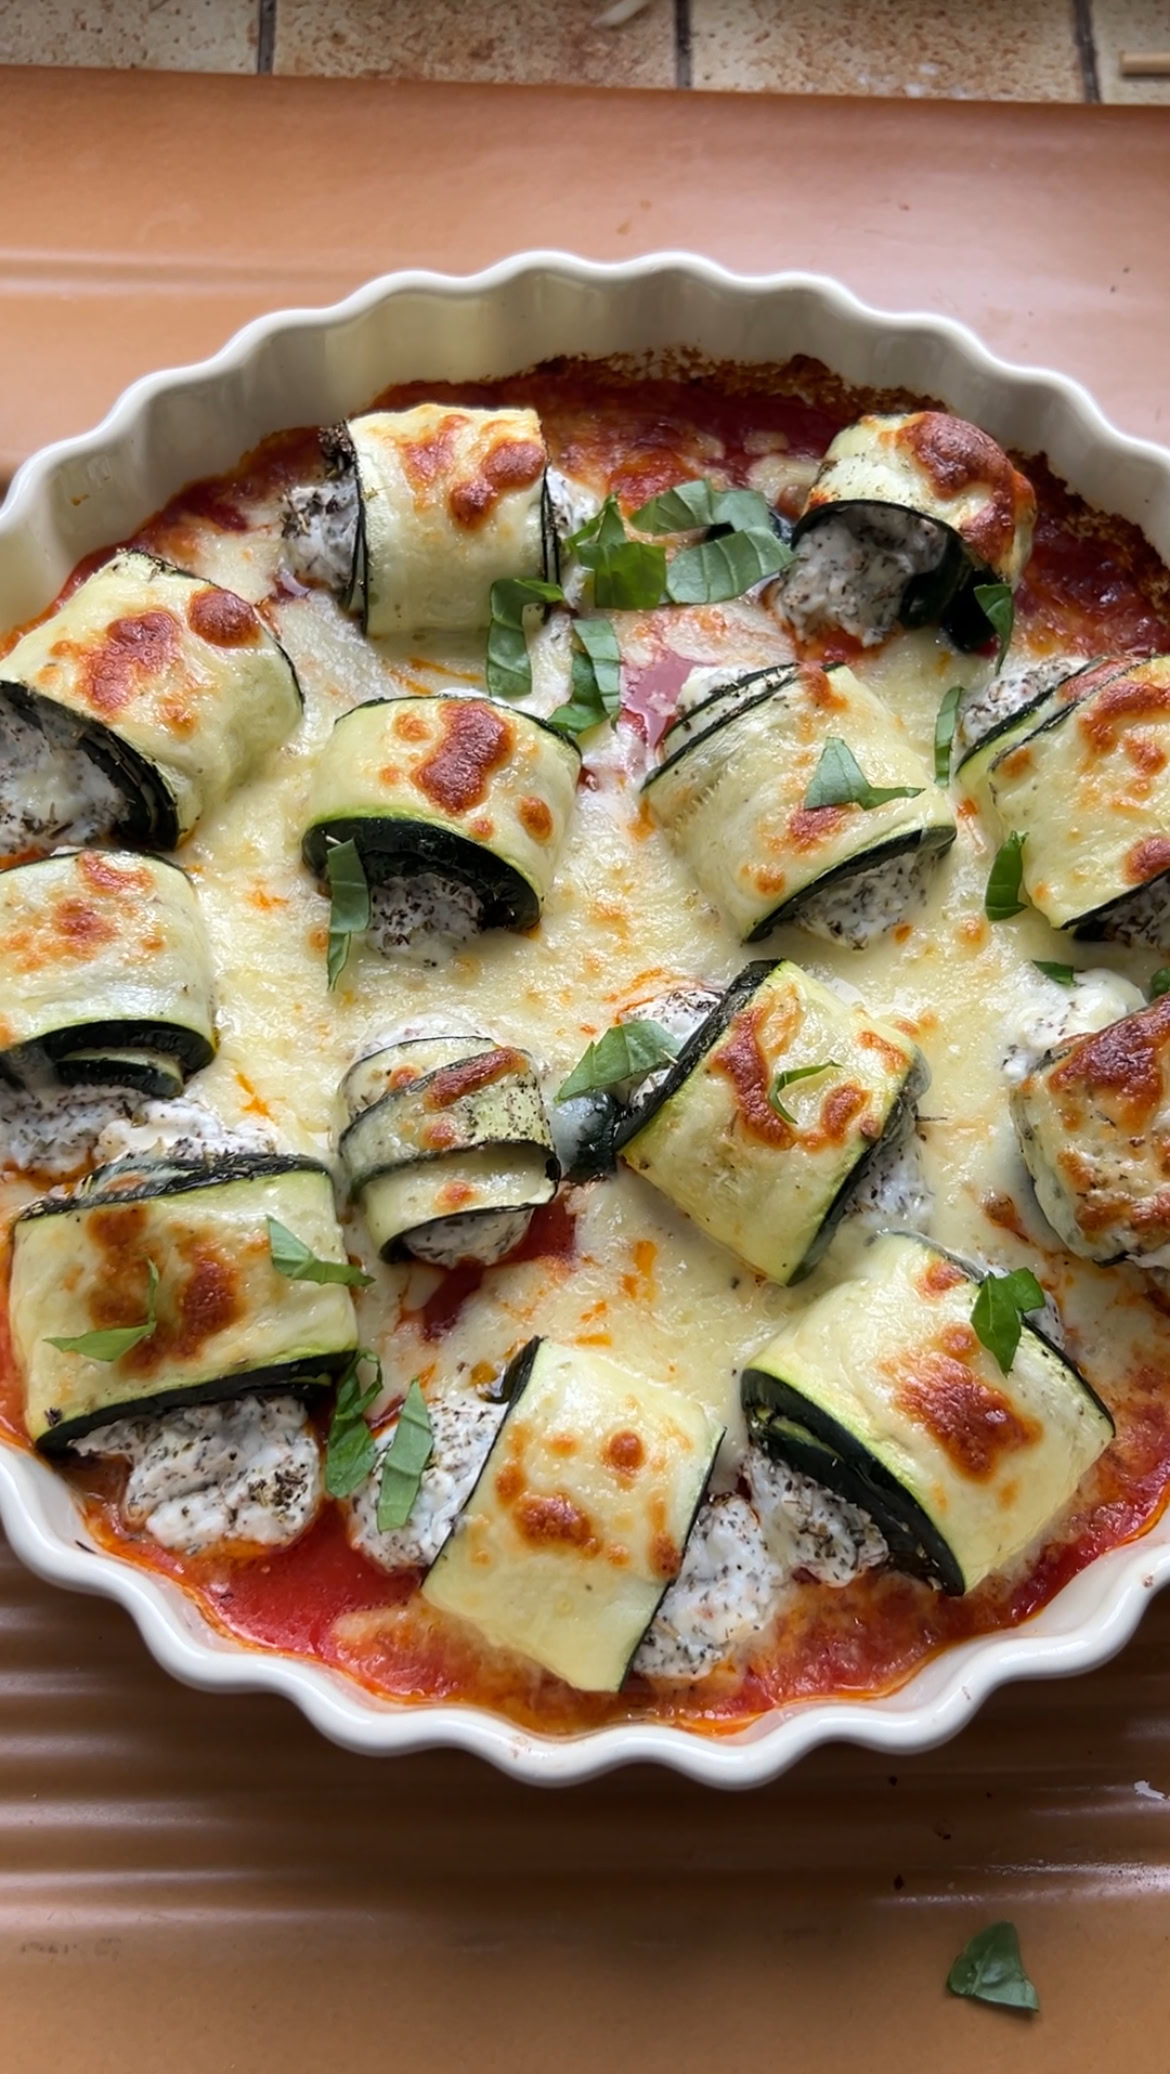 Zucchini involtini in their dish, just out of the oven, with melted mozzarella on top.